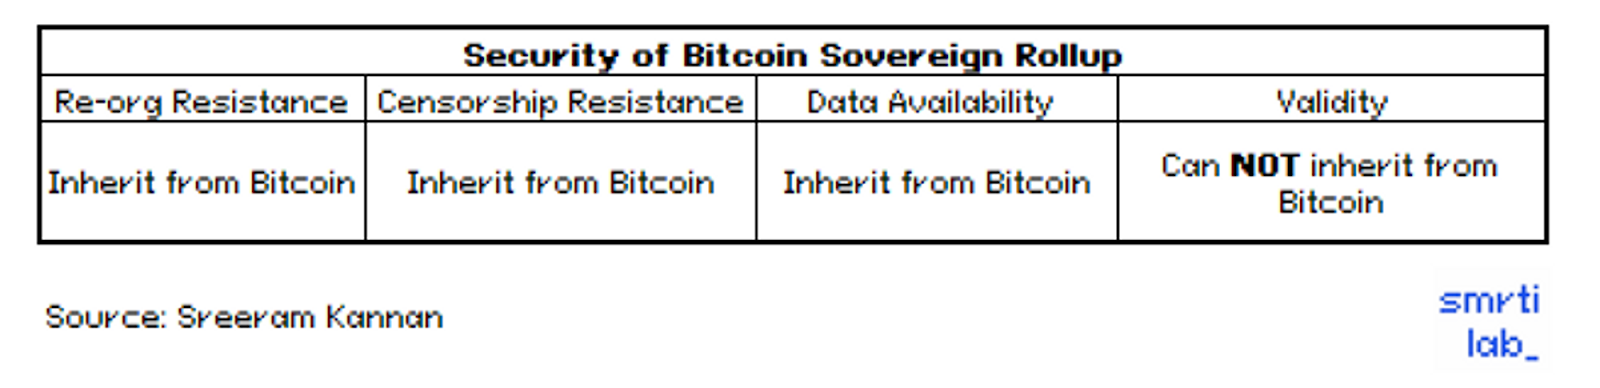 Fig 5. Security of Bitcoin Sovereign Rollup